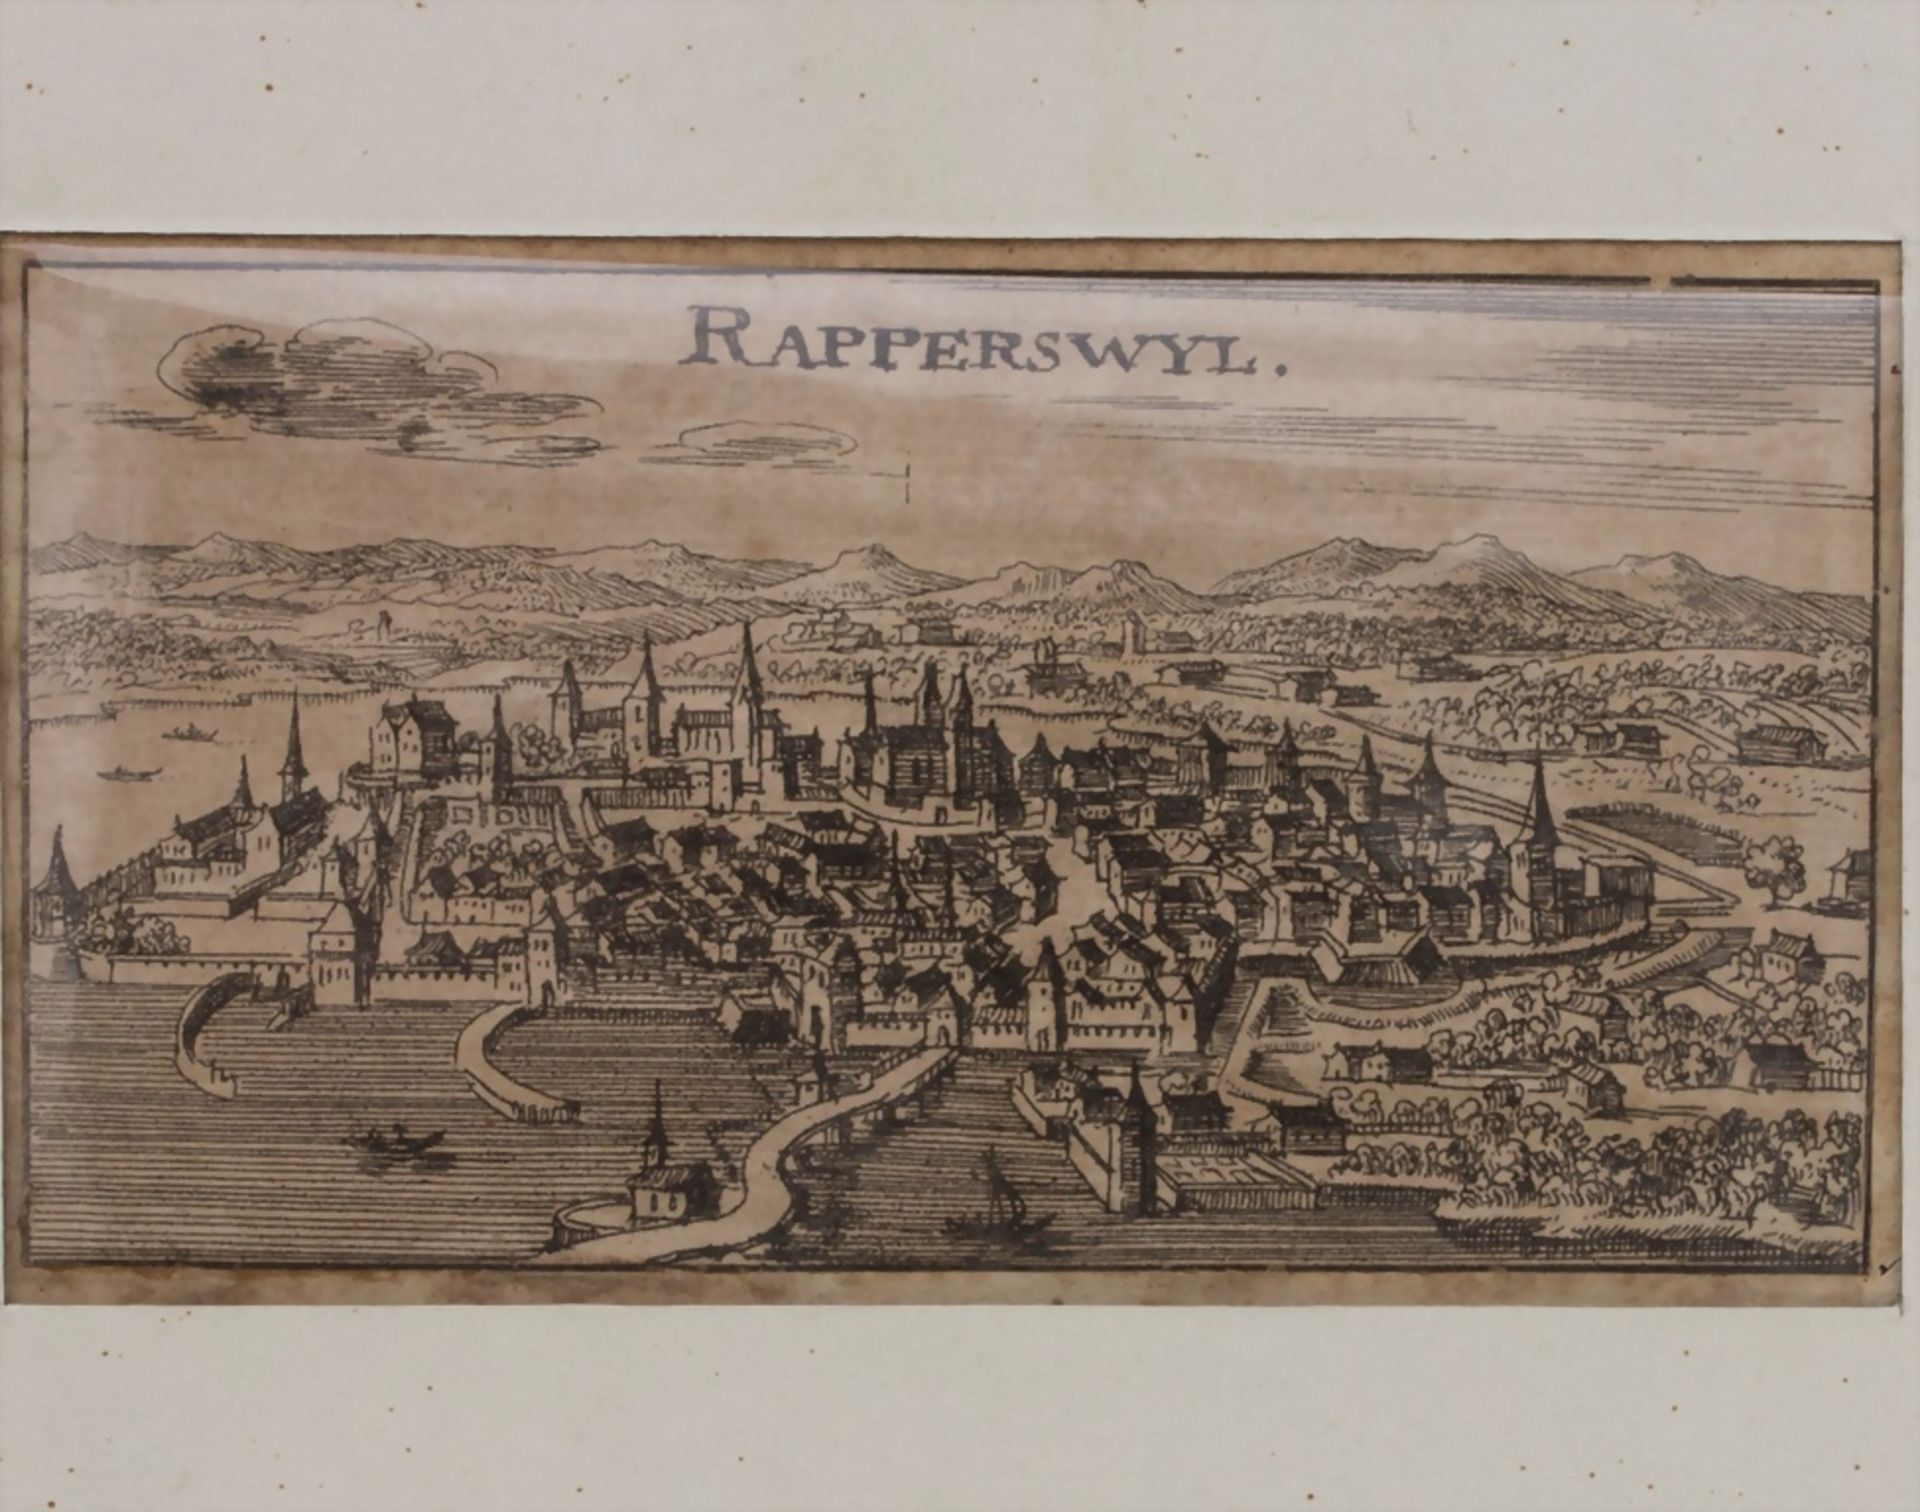 Historische Ansicht 'Rapperswil' / A historic view of Rapperswil'